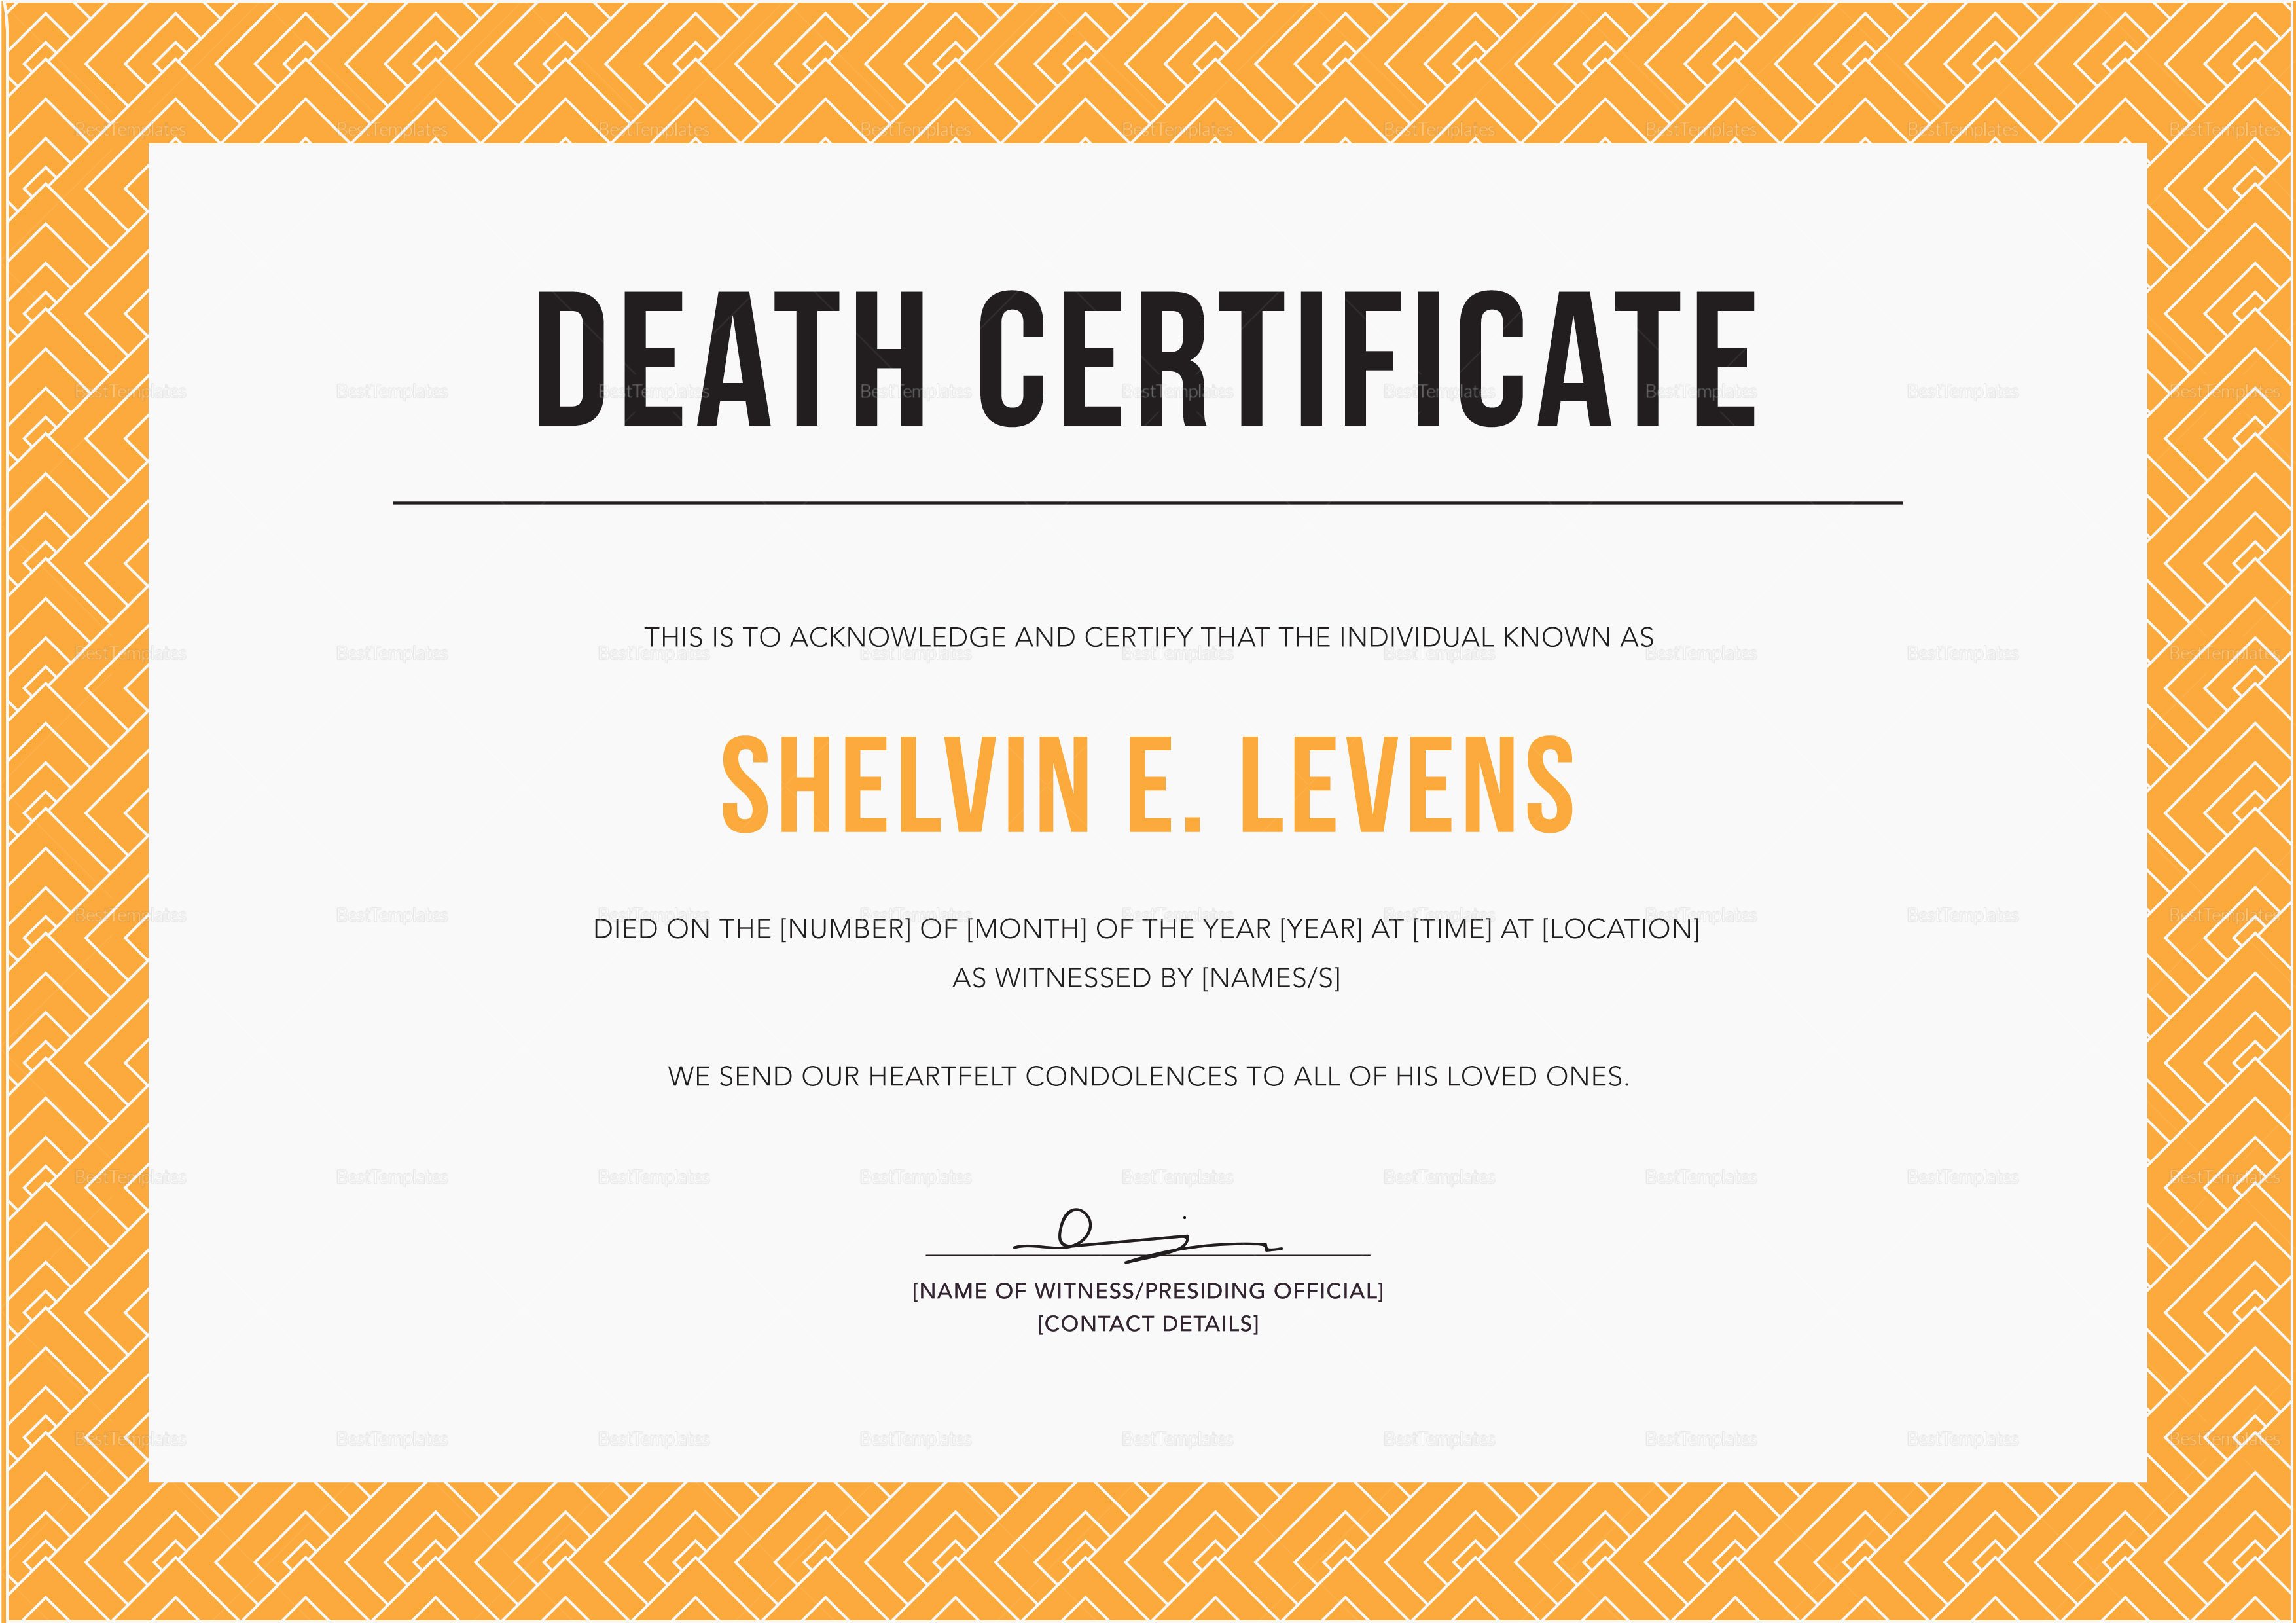 Free Death Certificate Template Awesome Death Certificate Design Template In Psd Word Illustrator Indesign